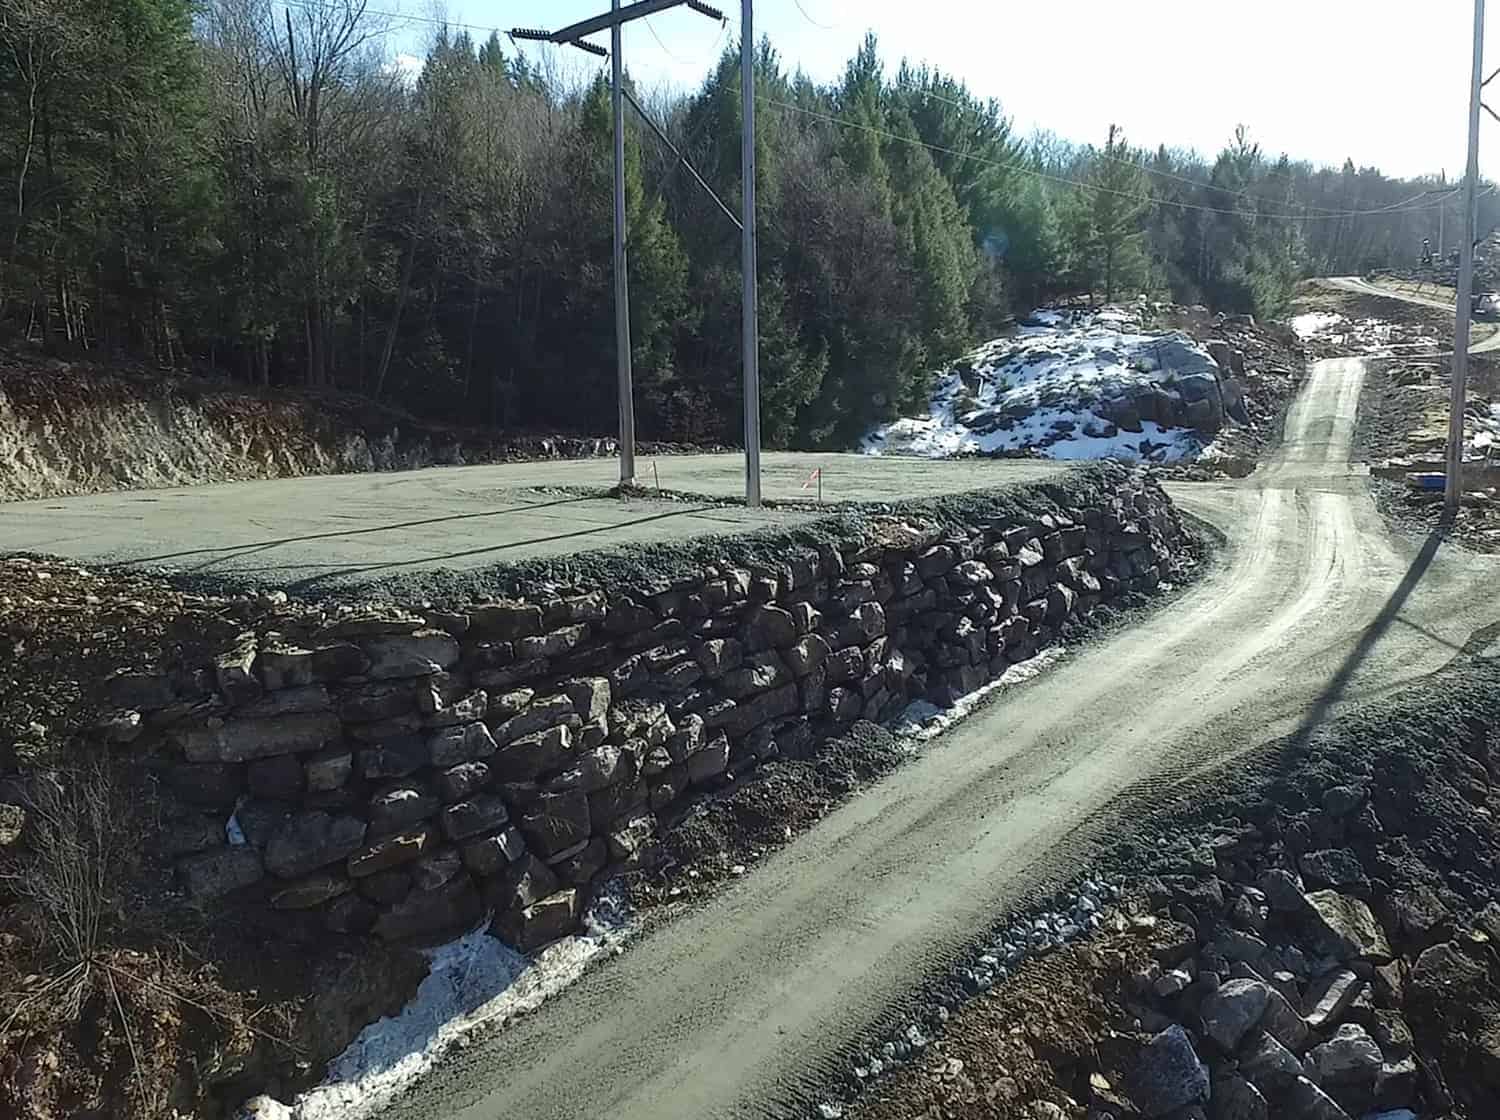 BLUROC builds temporary and permanent access roads